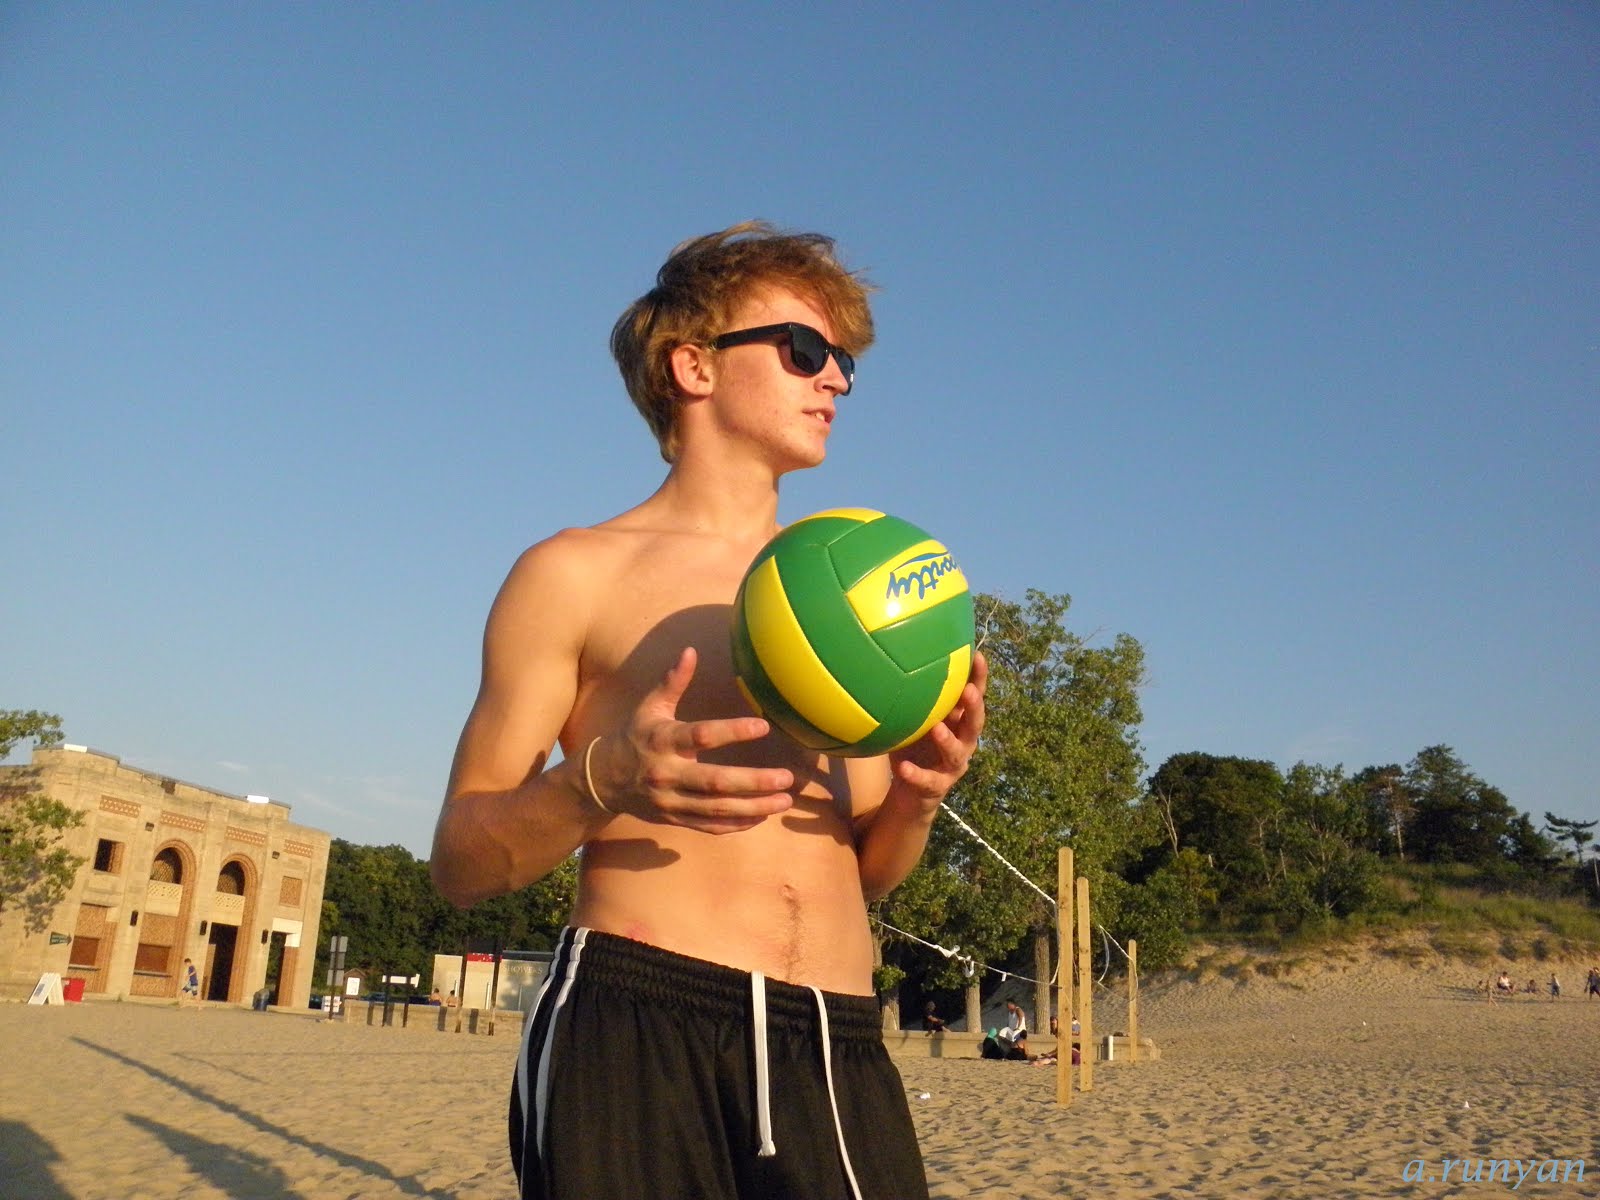 Love volleyball at the beach!.